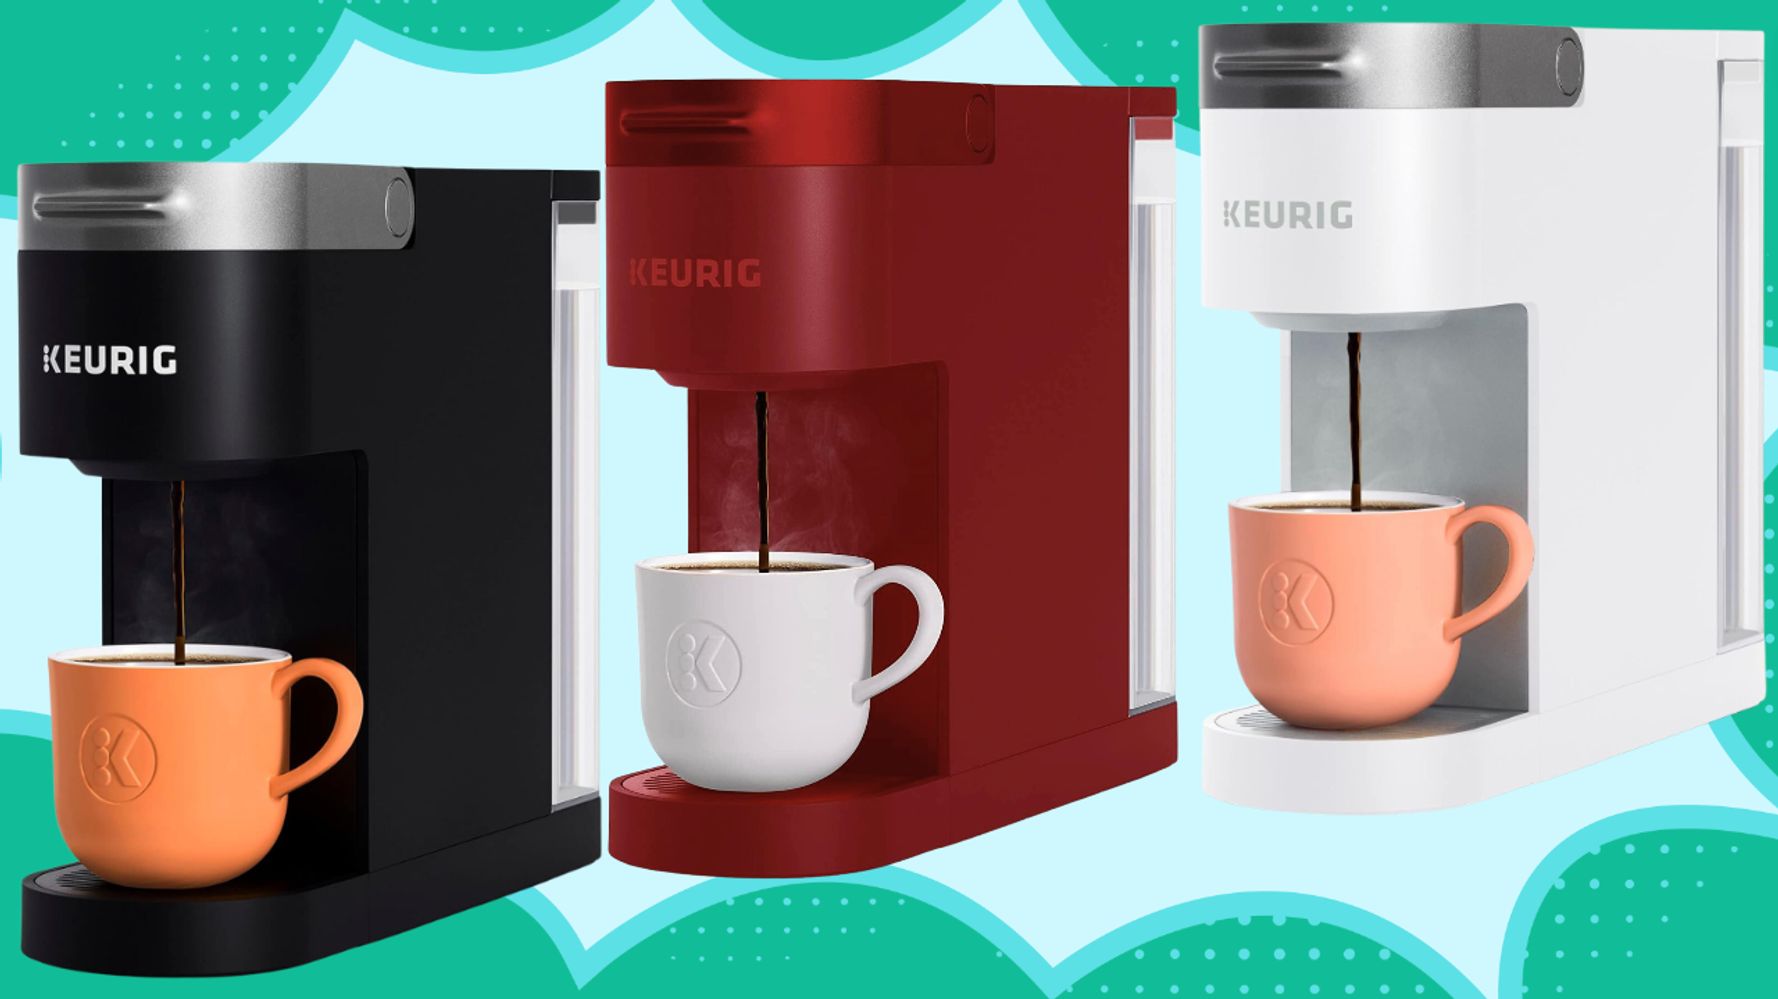 Keurig coffee makers are on sale for up to $46 off